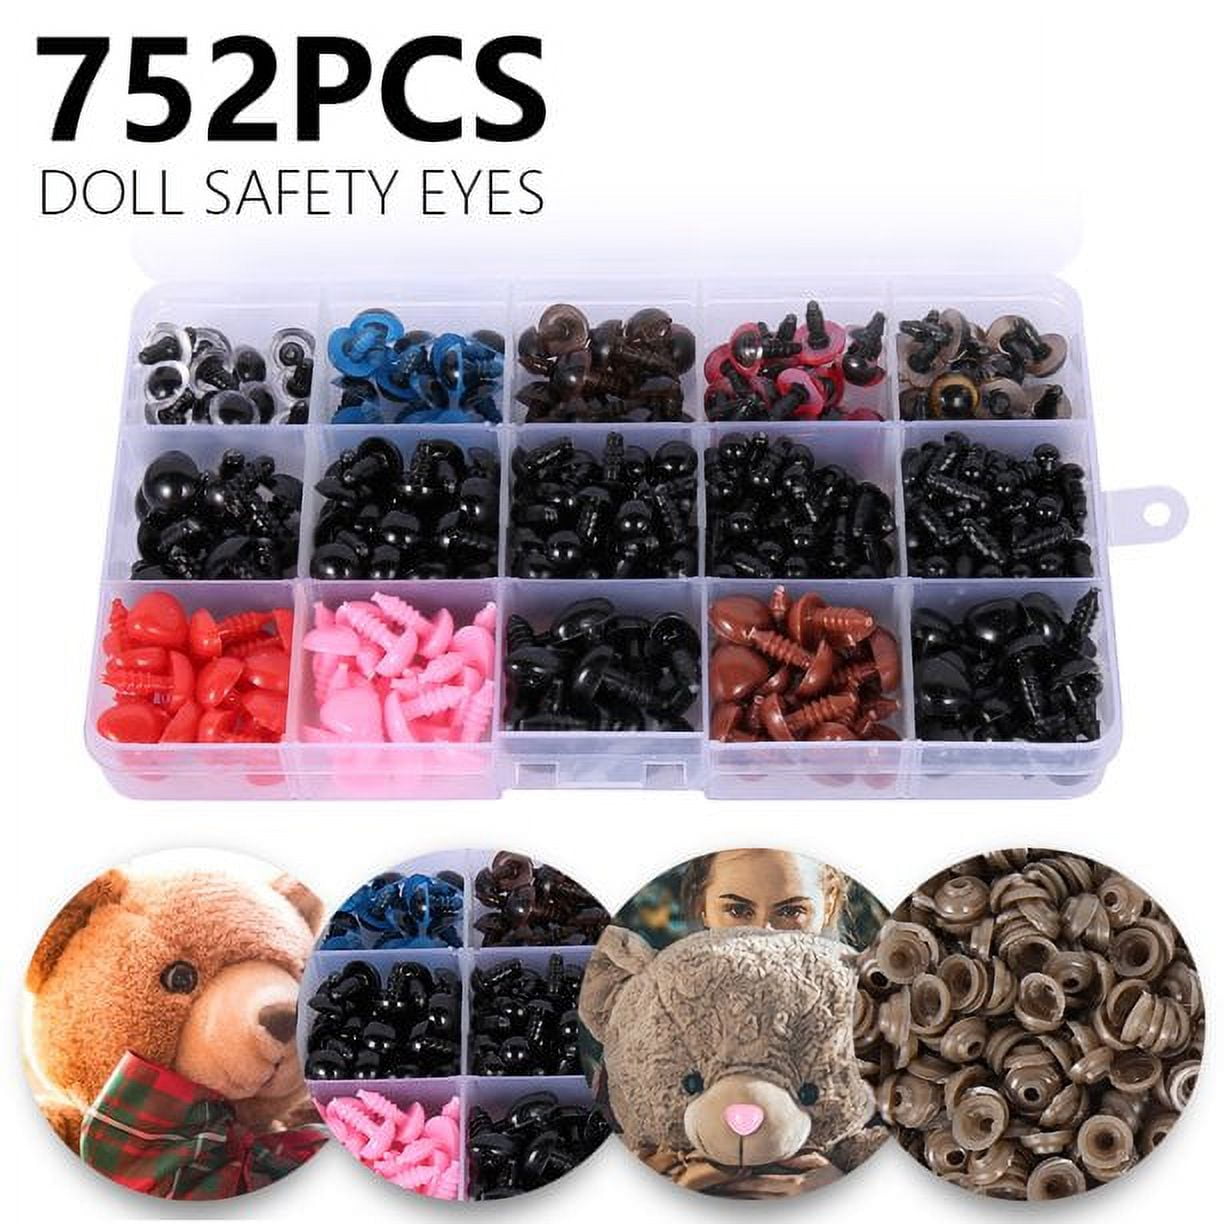 ODOMY 752pcs Colorful Plastic Safety Eyes and Noses Multiple Sizes